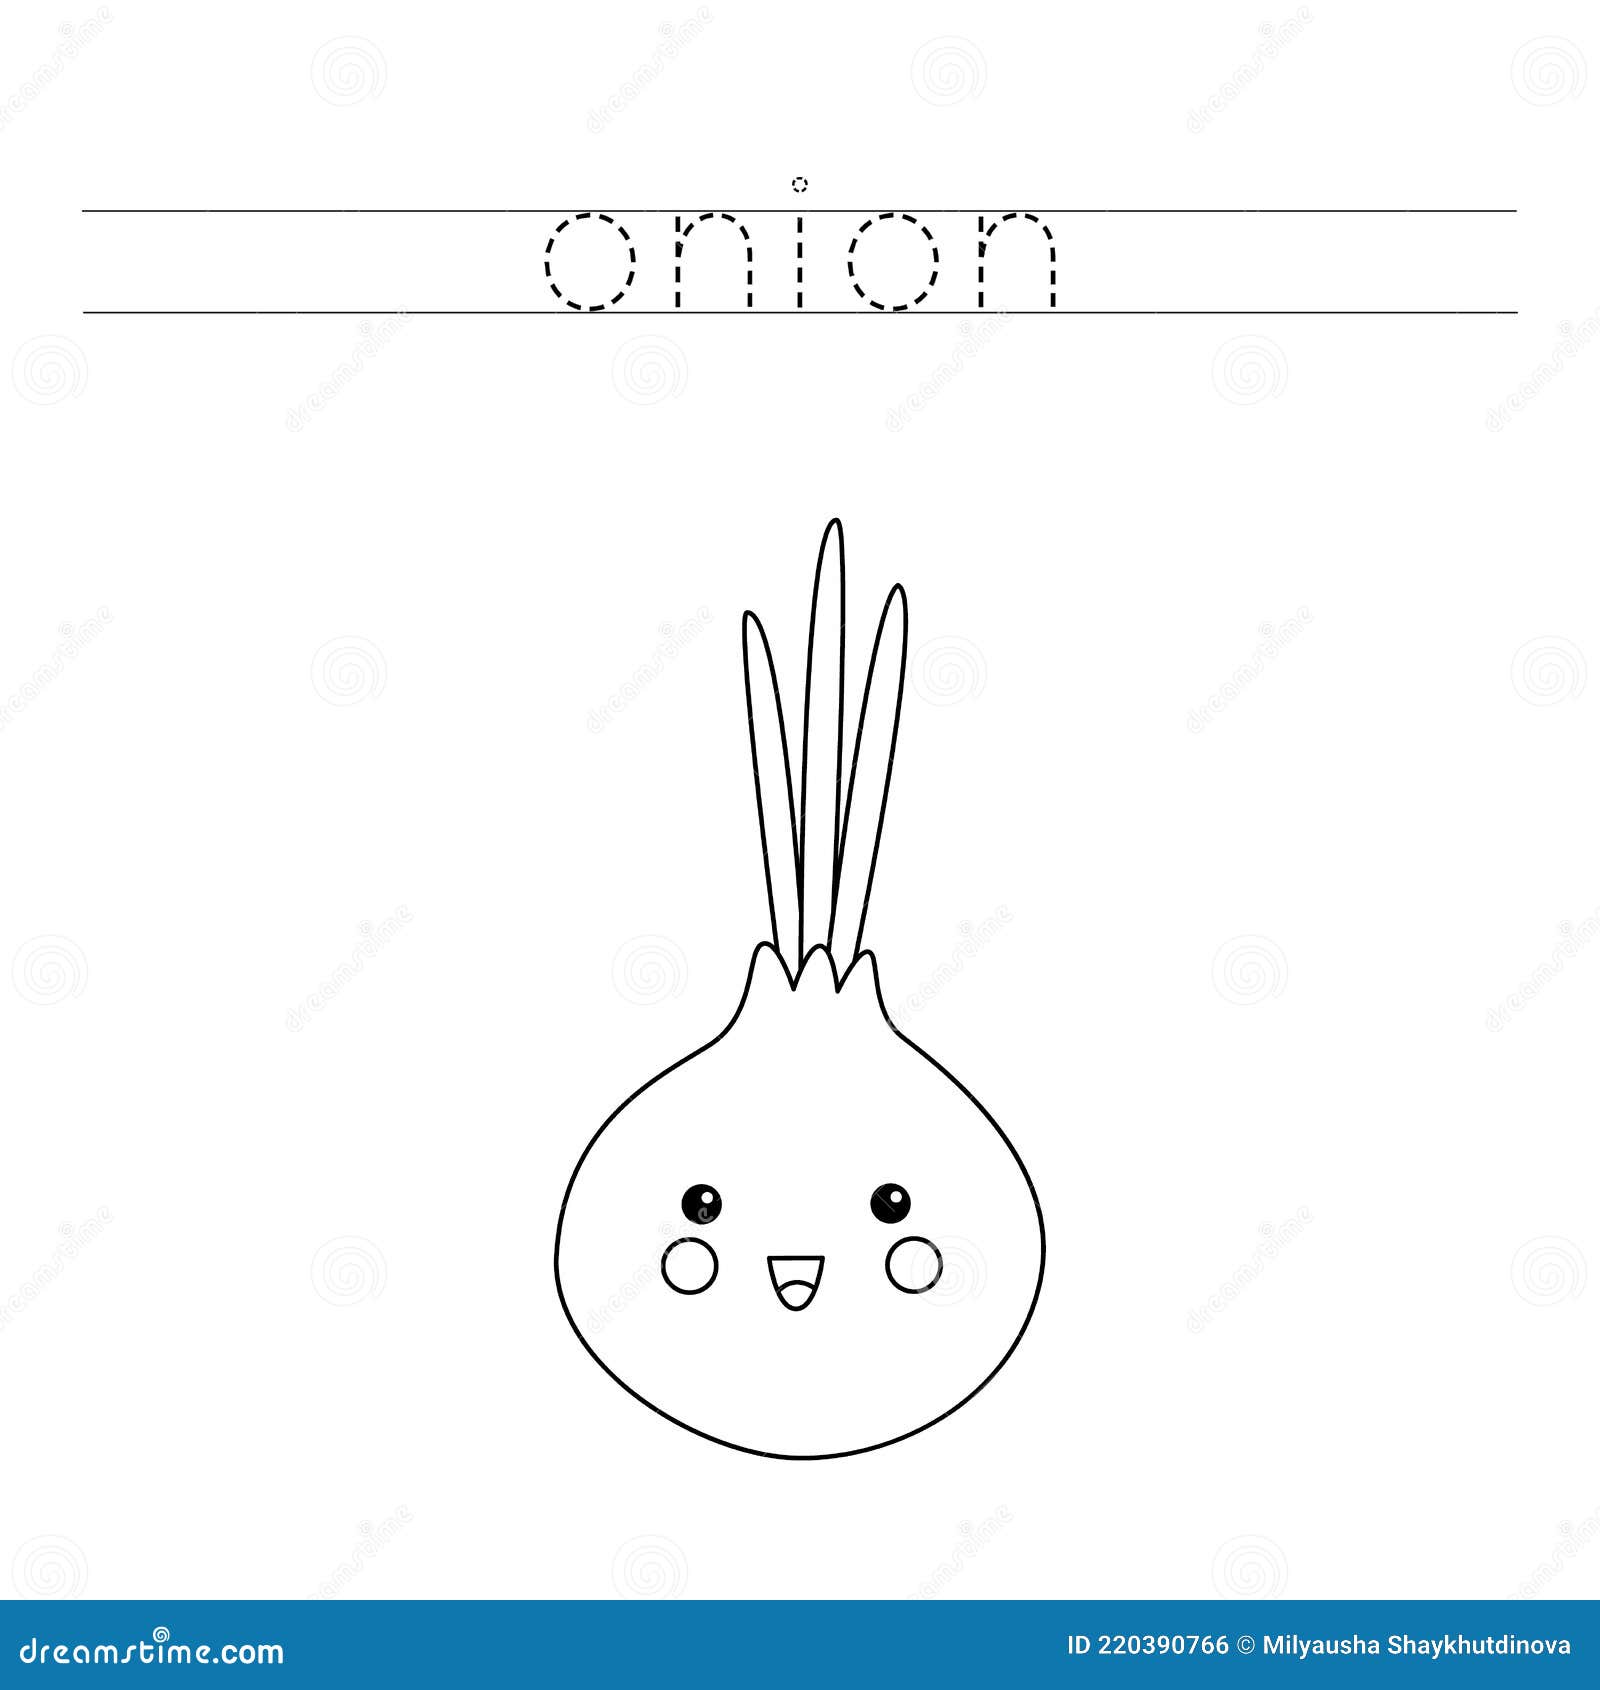 Onion Outline Vector Images (over 7,000)